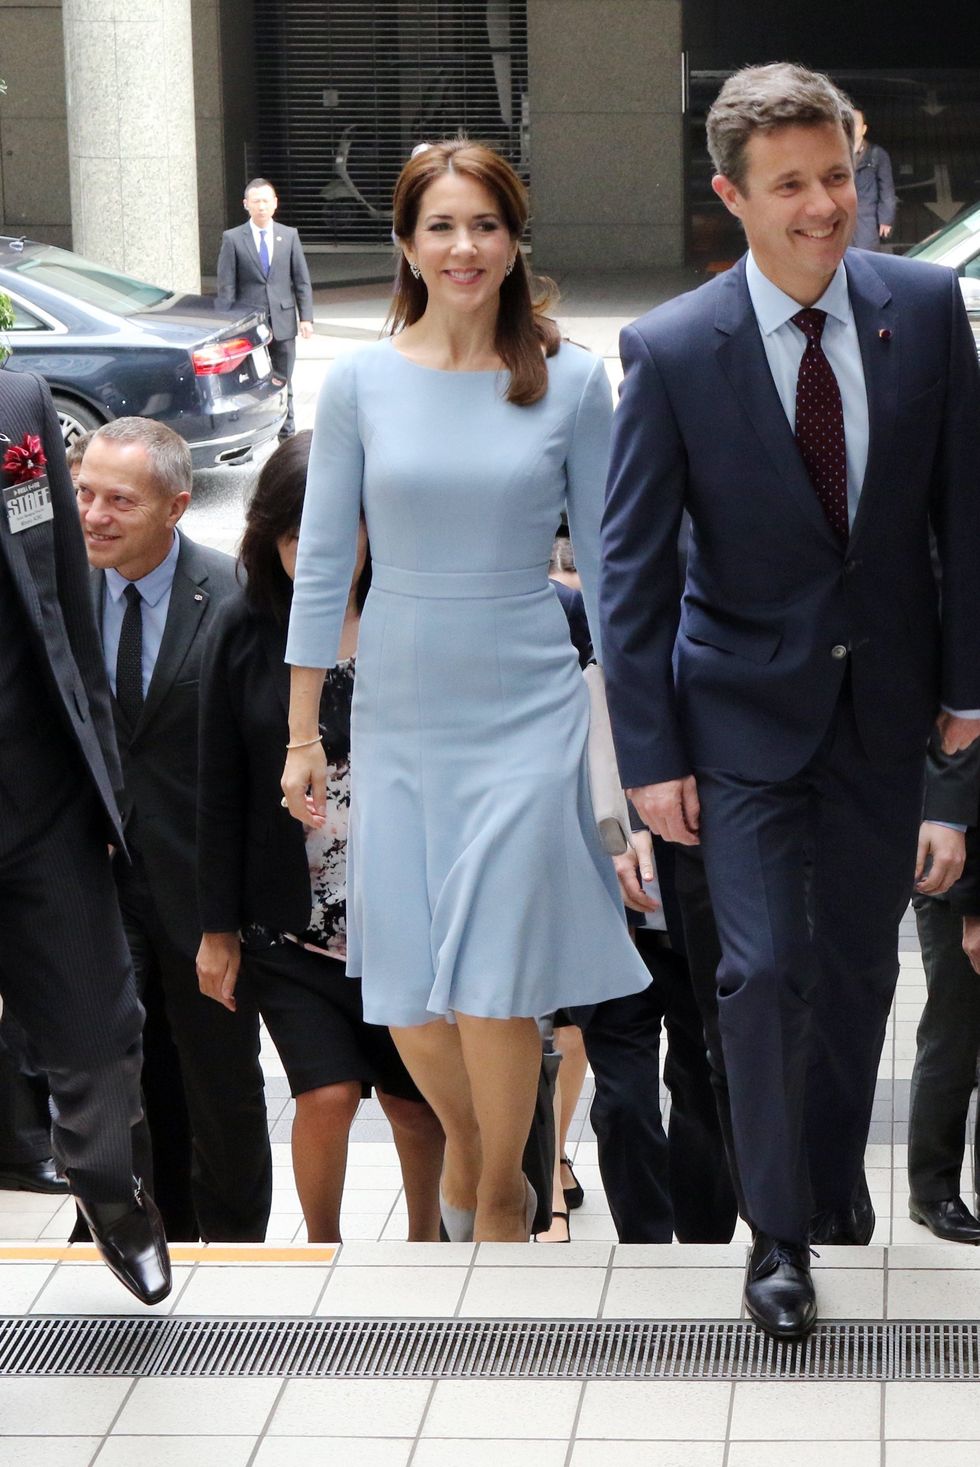 danish crown prince frederik c and crown princess mary centre l arrive at a fashion school to observe a workshop for seal skin fashion products in tokyo on march 28, 2015 the danish royal couple are on a three day visit to promote greenland afp photo yoshikazu tsuno photo credit should read yoshikazu tsunoafp via getty images